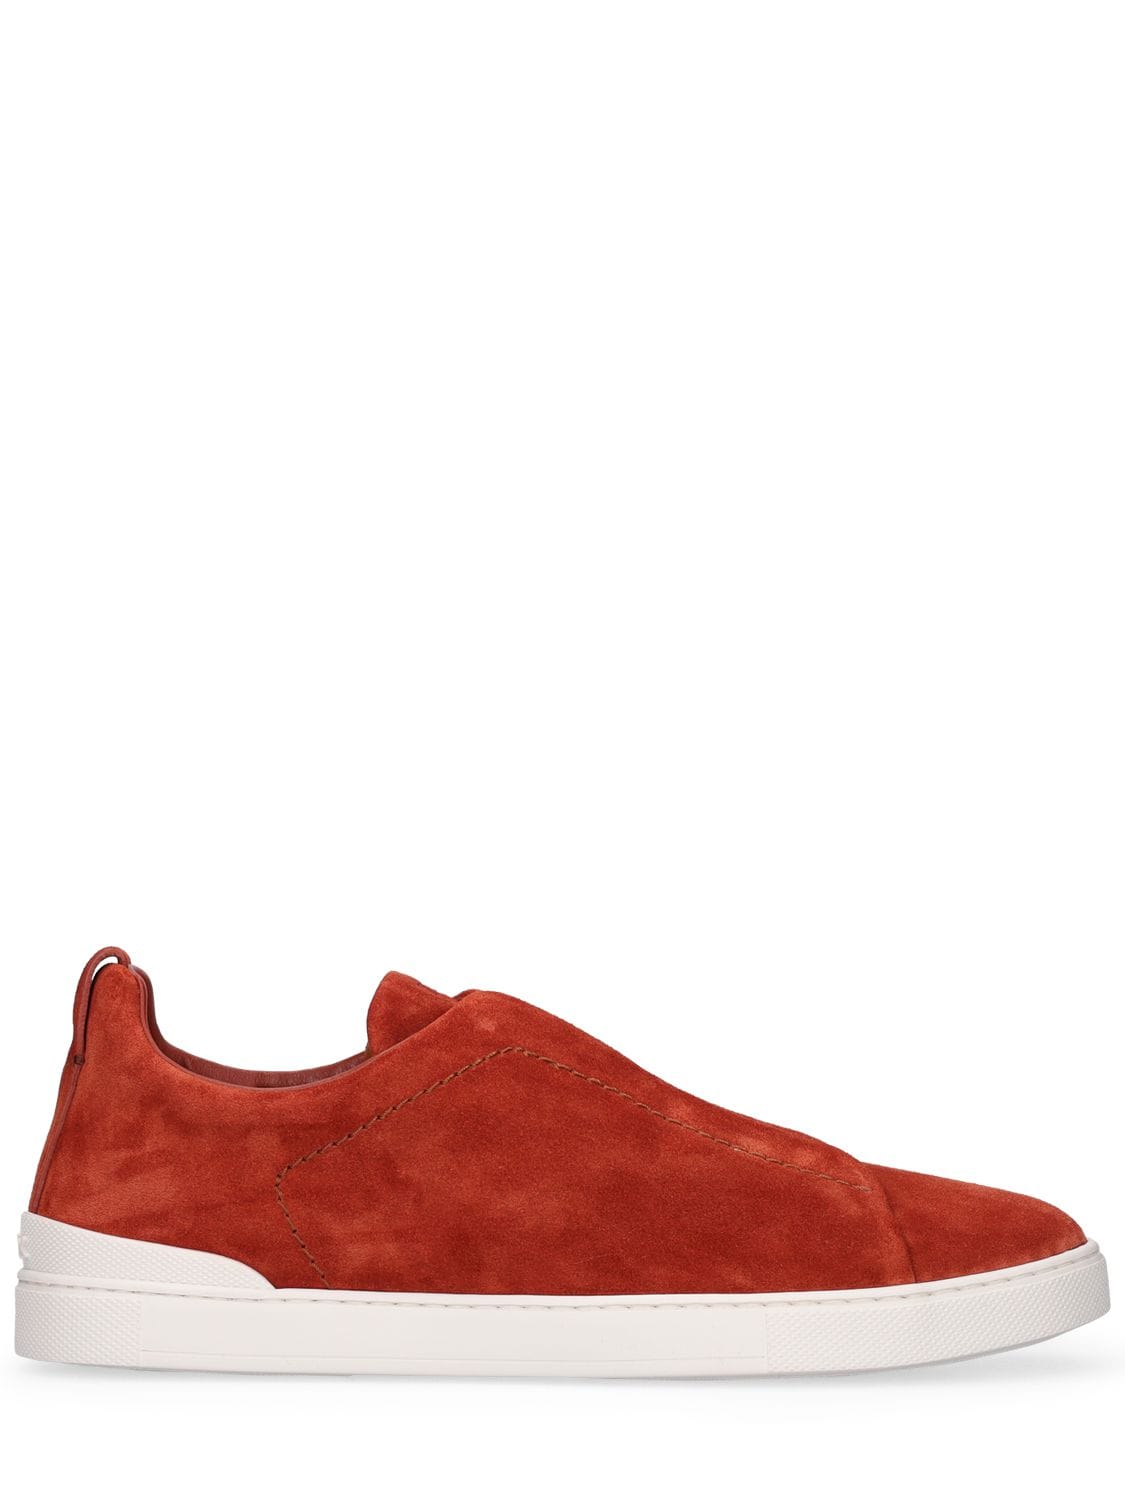 Zegna Triple Stitch Leather Low-top Sneakers In Rust